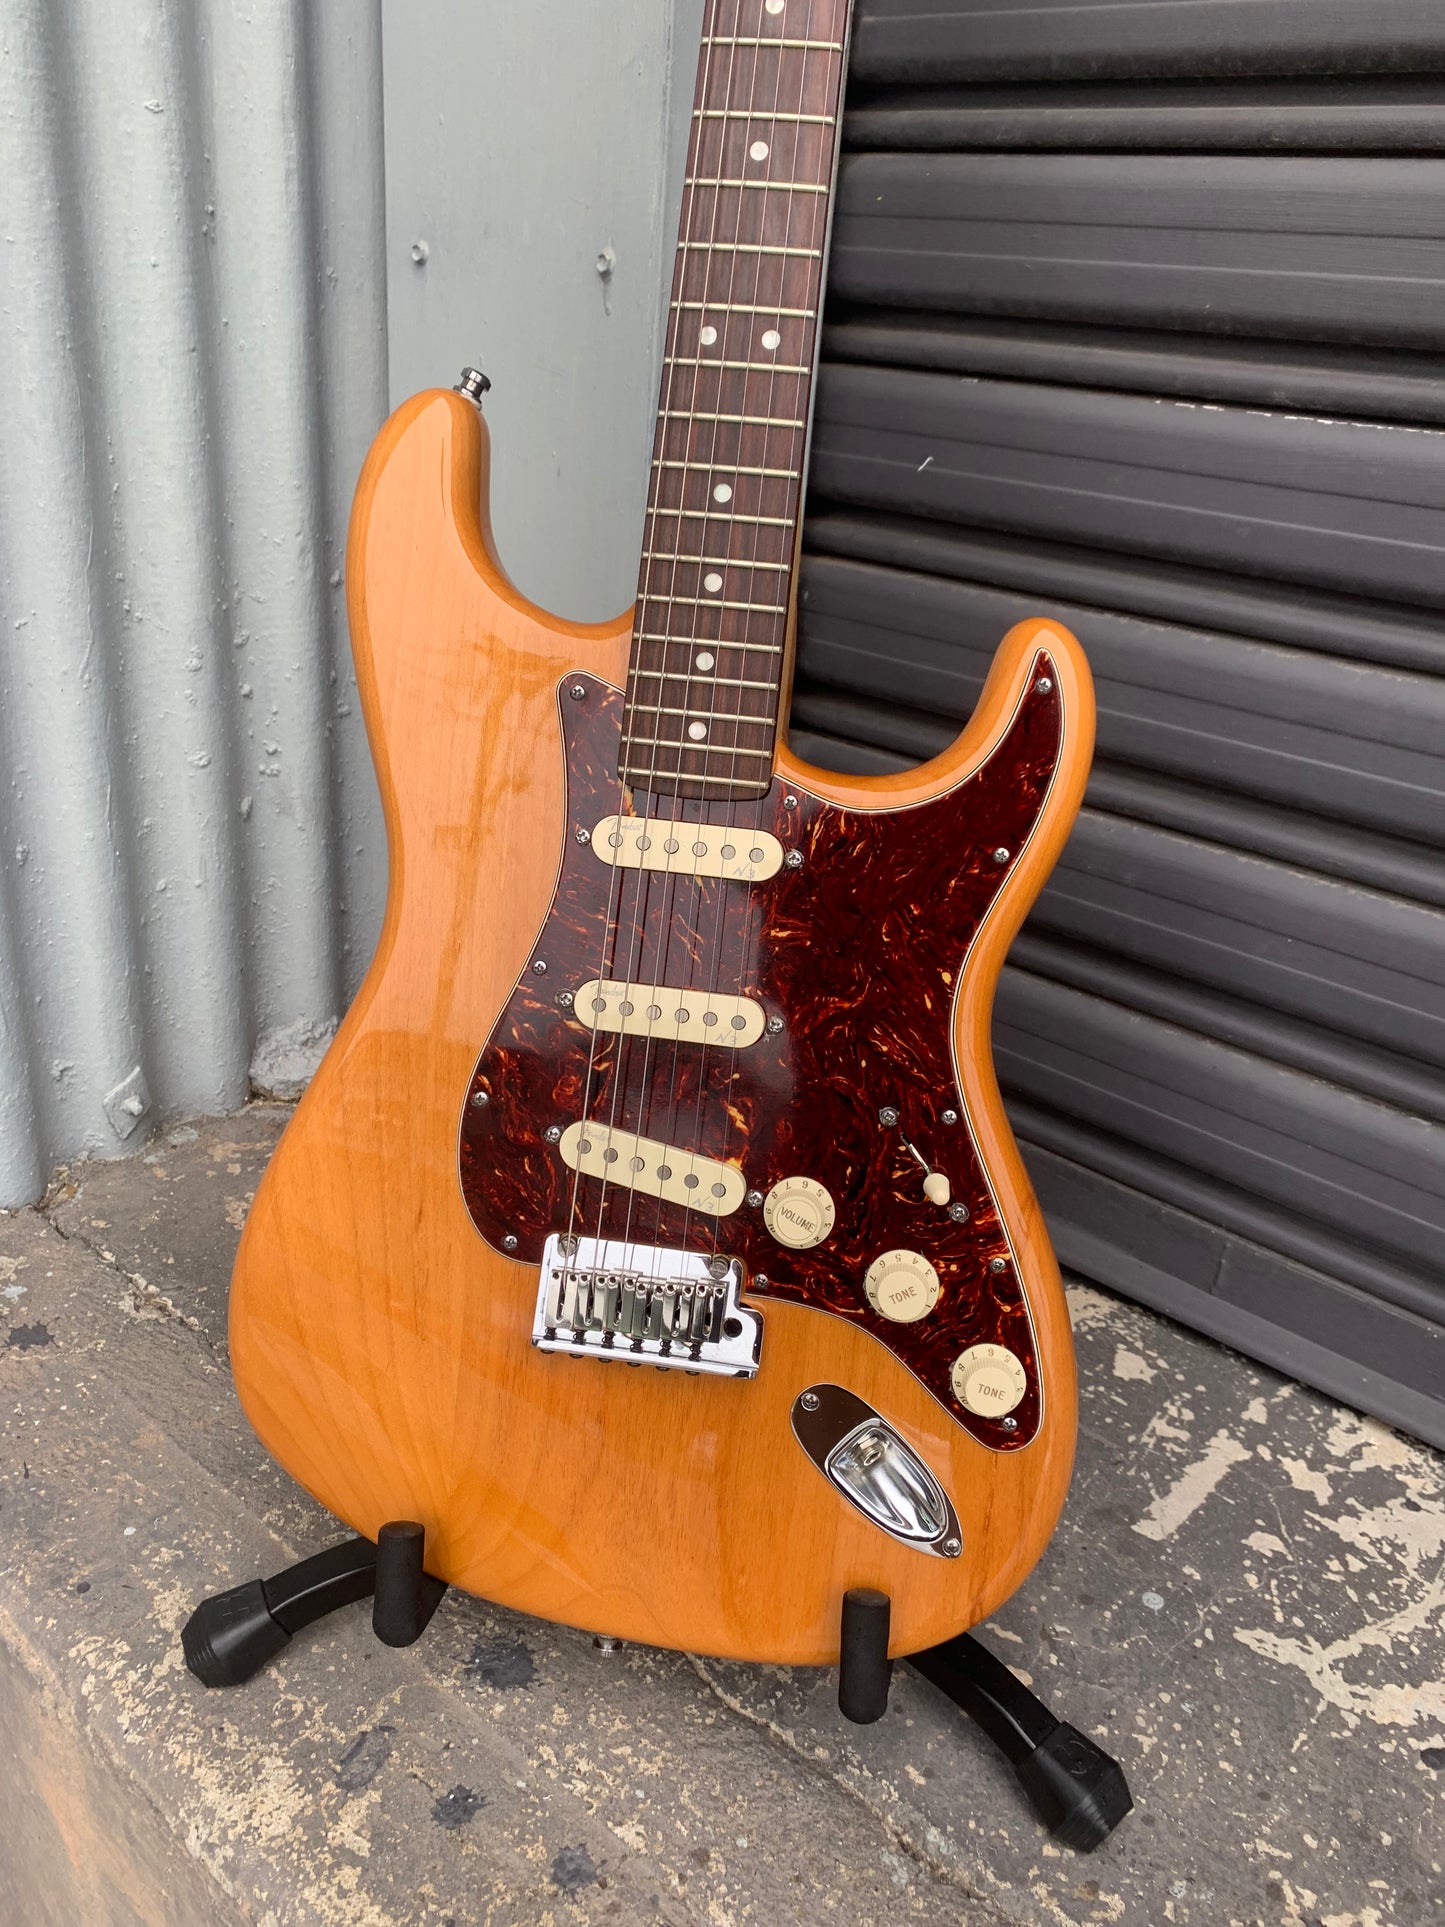 Fender U.S.A. Stratocaster Deluxe in Natural Ash